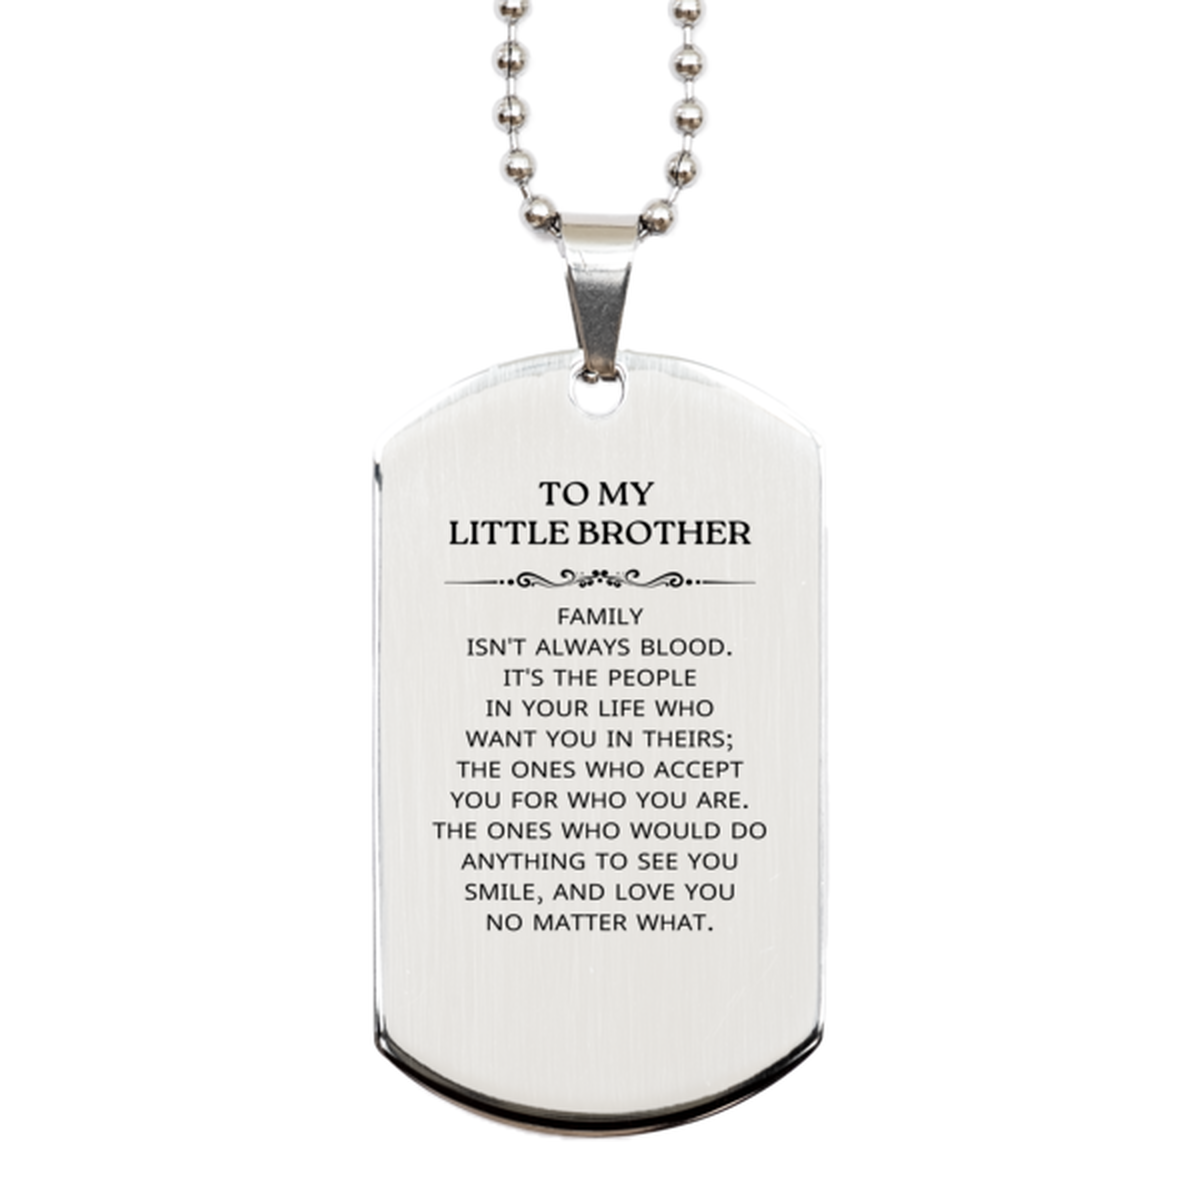 To My Little Brother Gifts, Family isn't always blood, Little Brother Silver Dog Tag, Birthday Christmas Unique Present For Little Brother